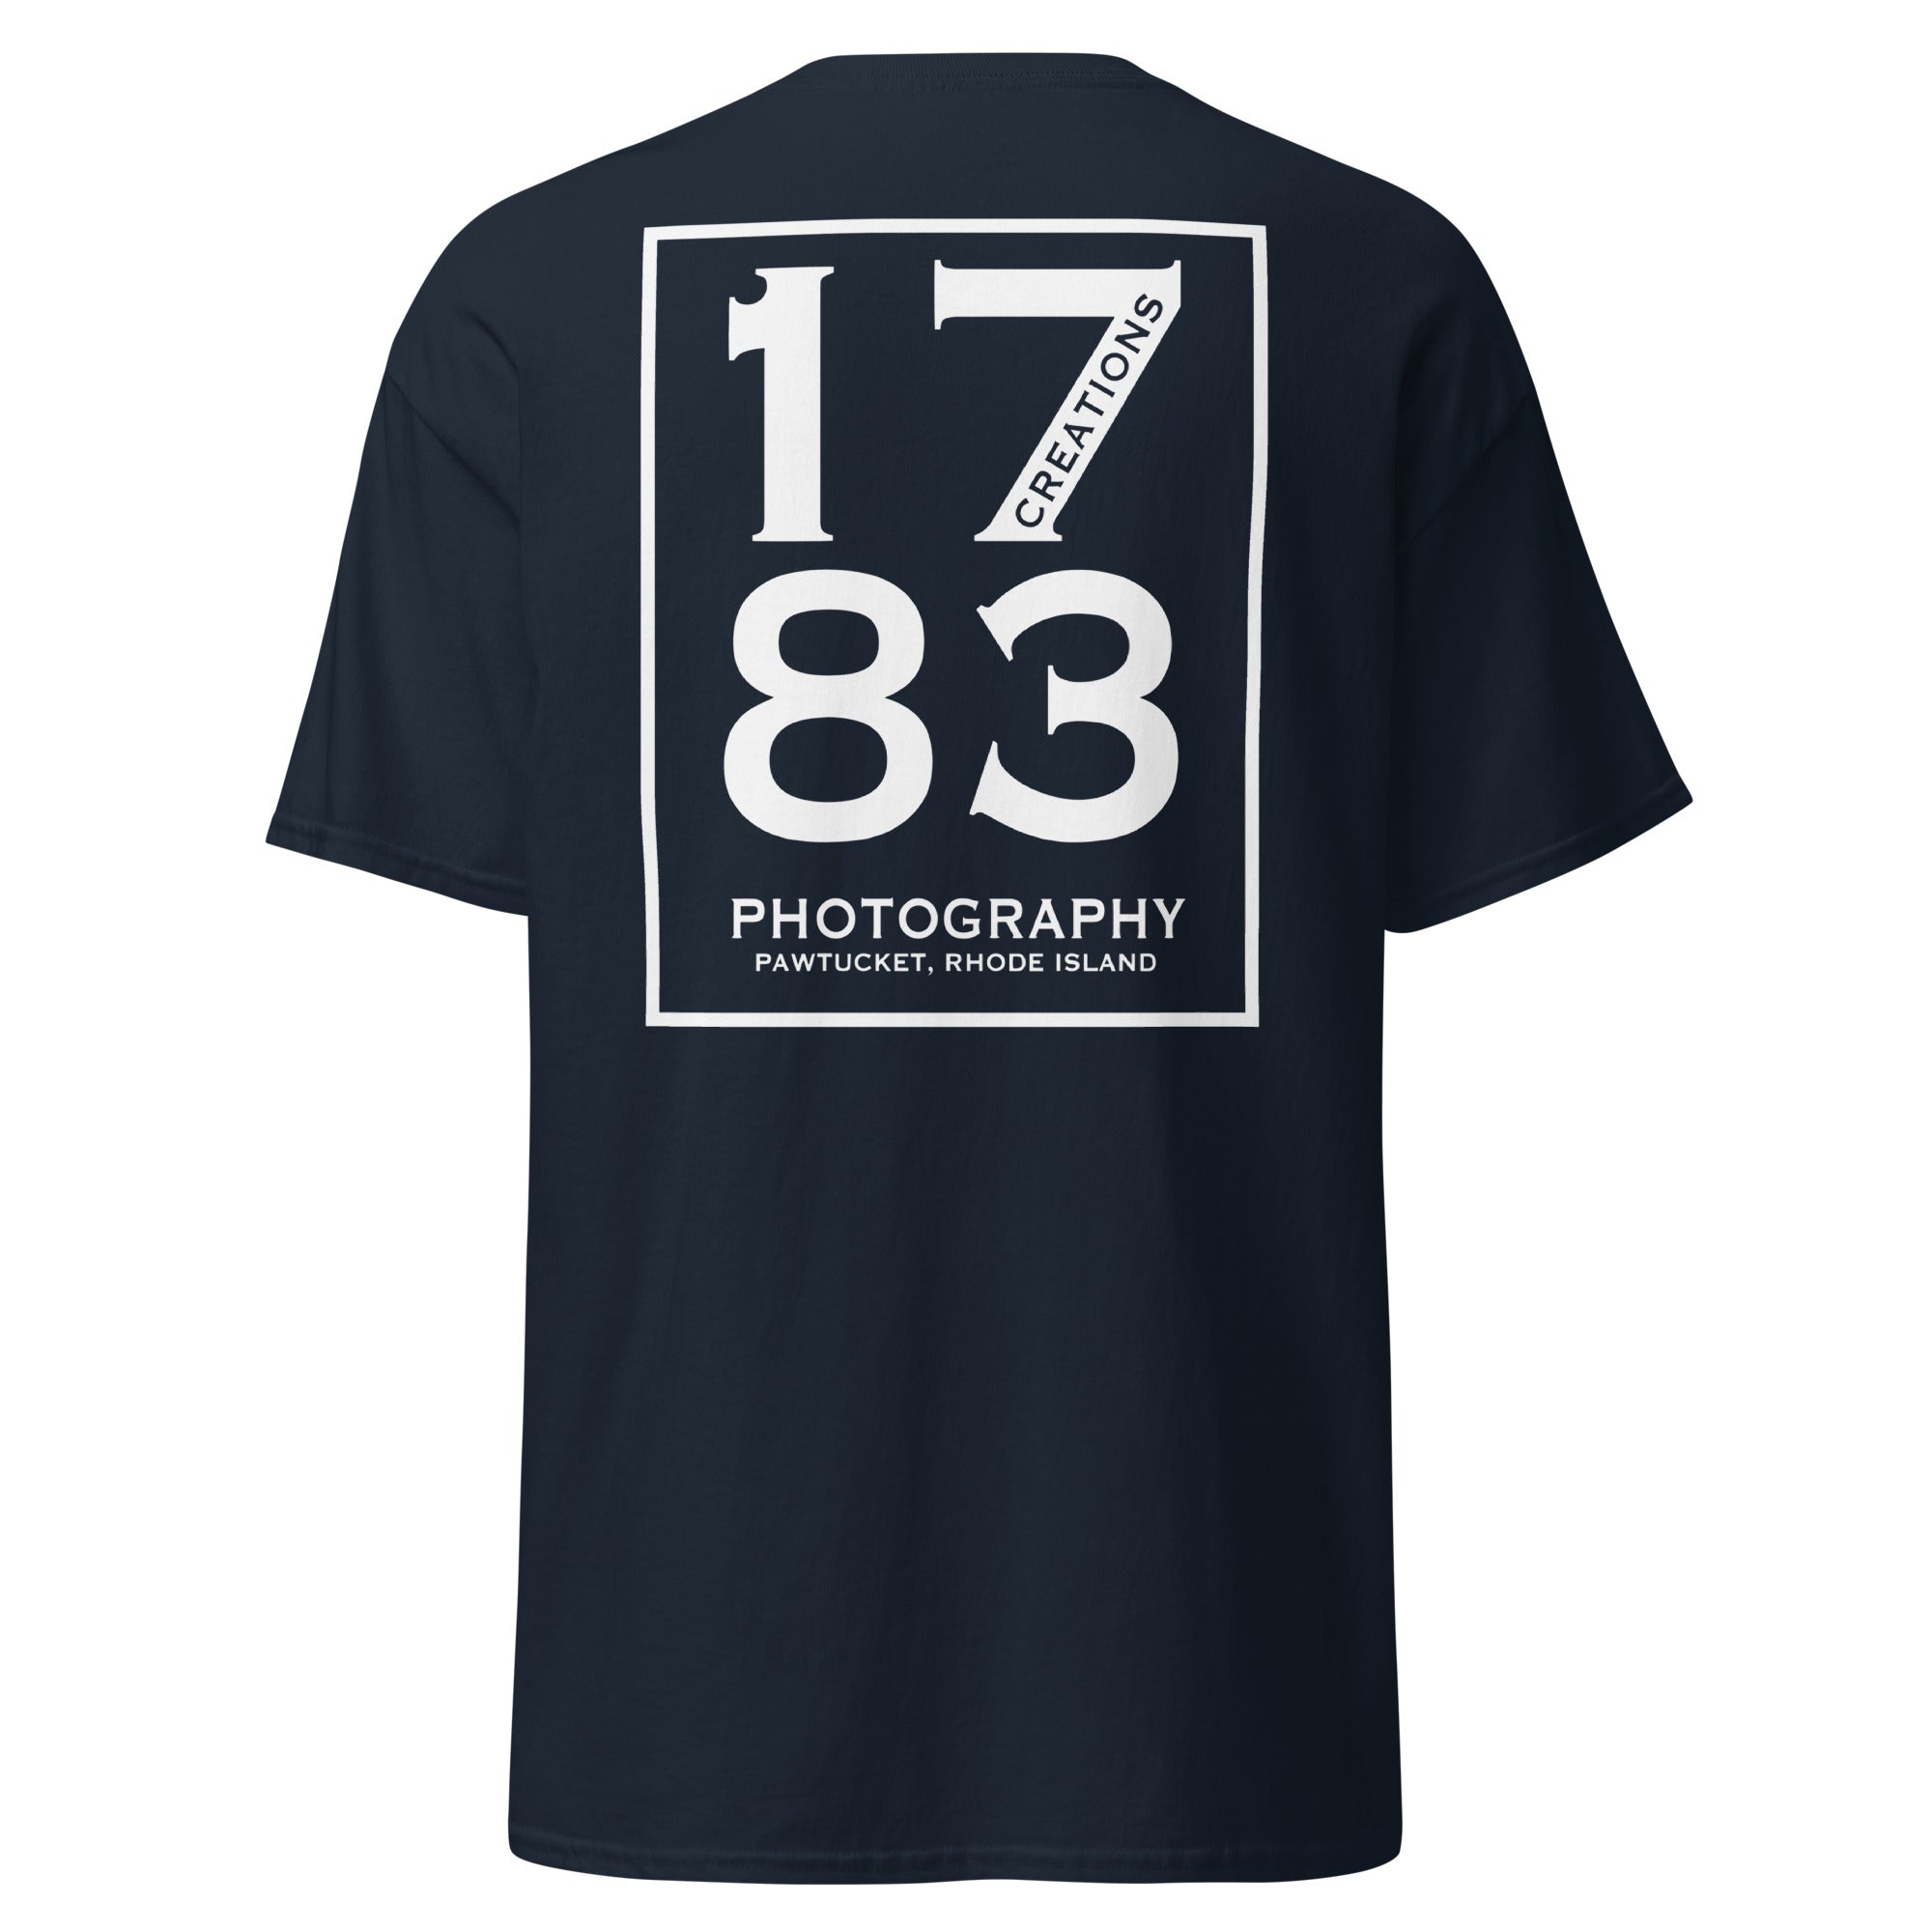 1783 Creations Photography Men's classic tee v2